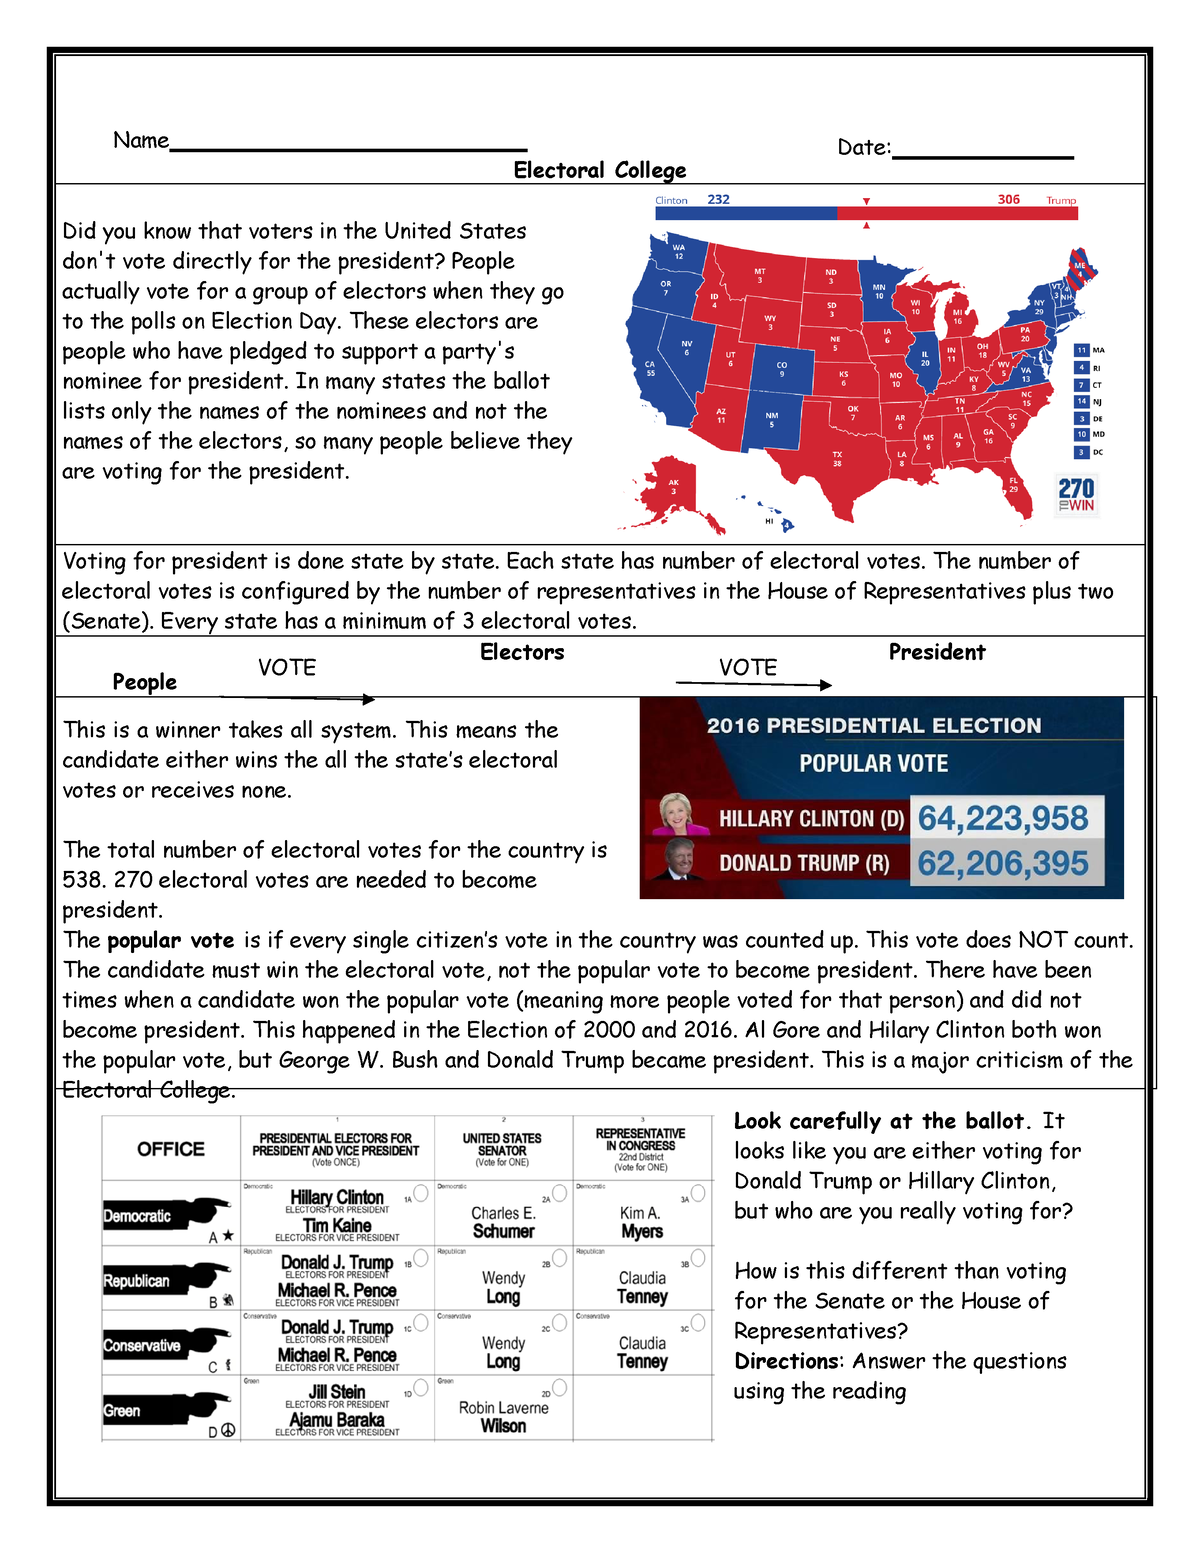 electoral-college-worksheet-readingwith-questionsand-answer-key-1-converted-name-electoral